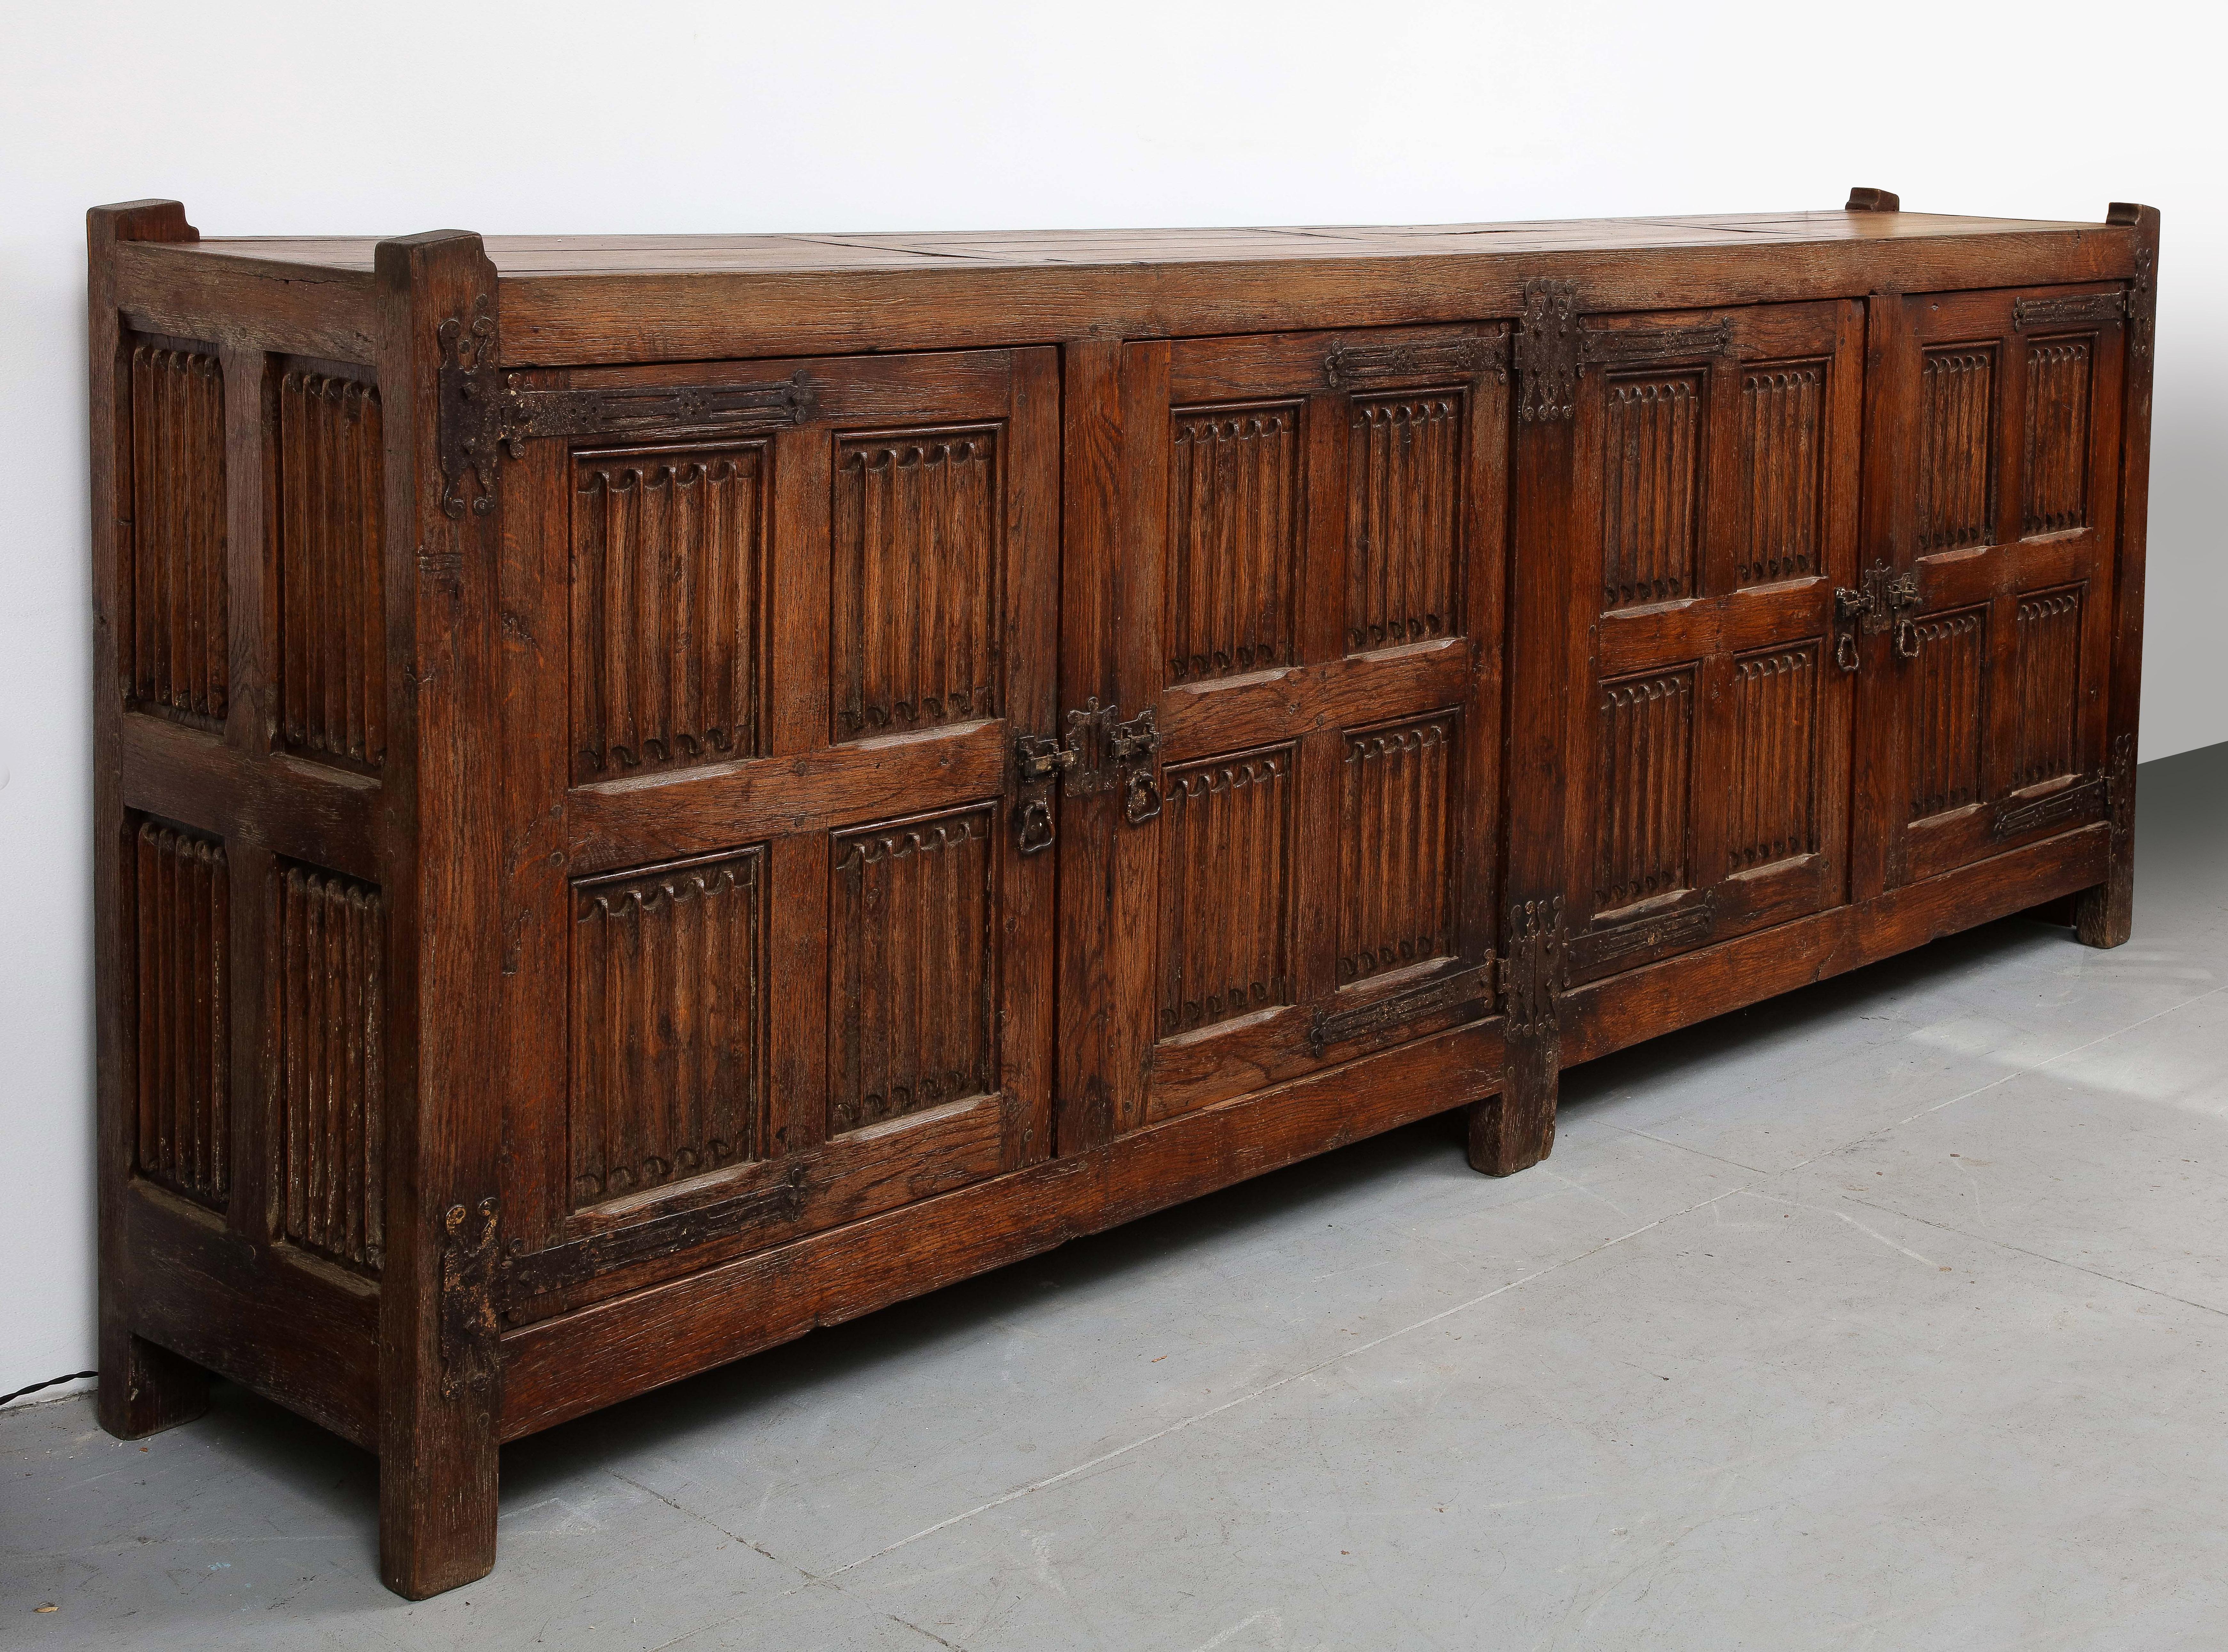 The hand carving technique is called linenfold, and it has wonderful hand wrought iron hardware.  It is in wonderful condition, has a nice glow, and all original.  It came from a Nunnery in France.

19th C. Hand Carved Oak Sideboard with